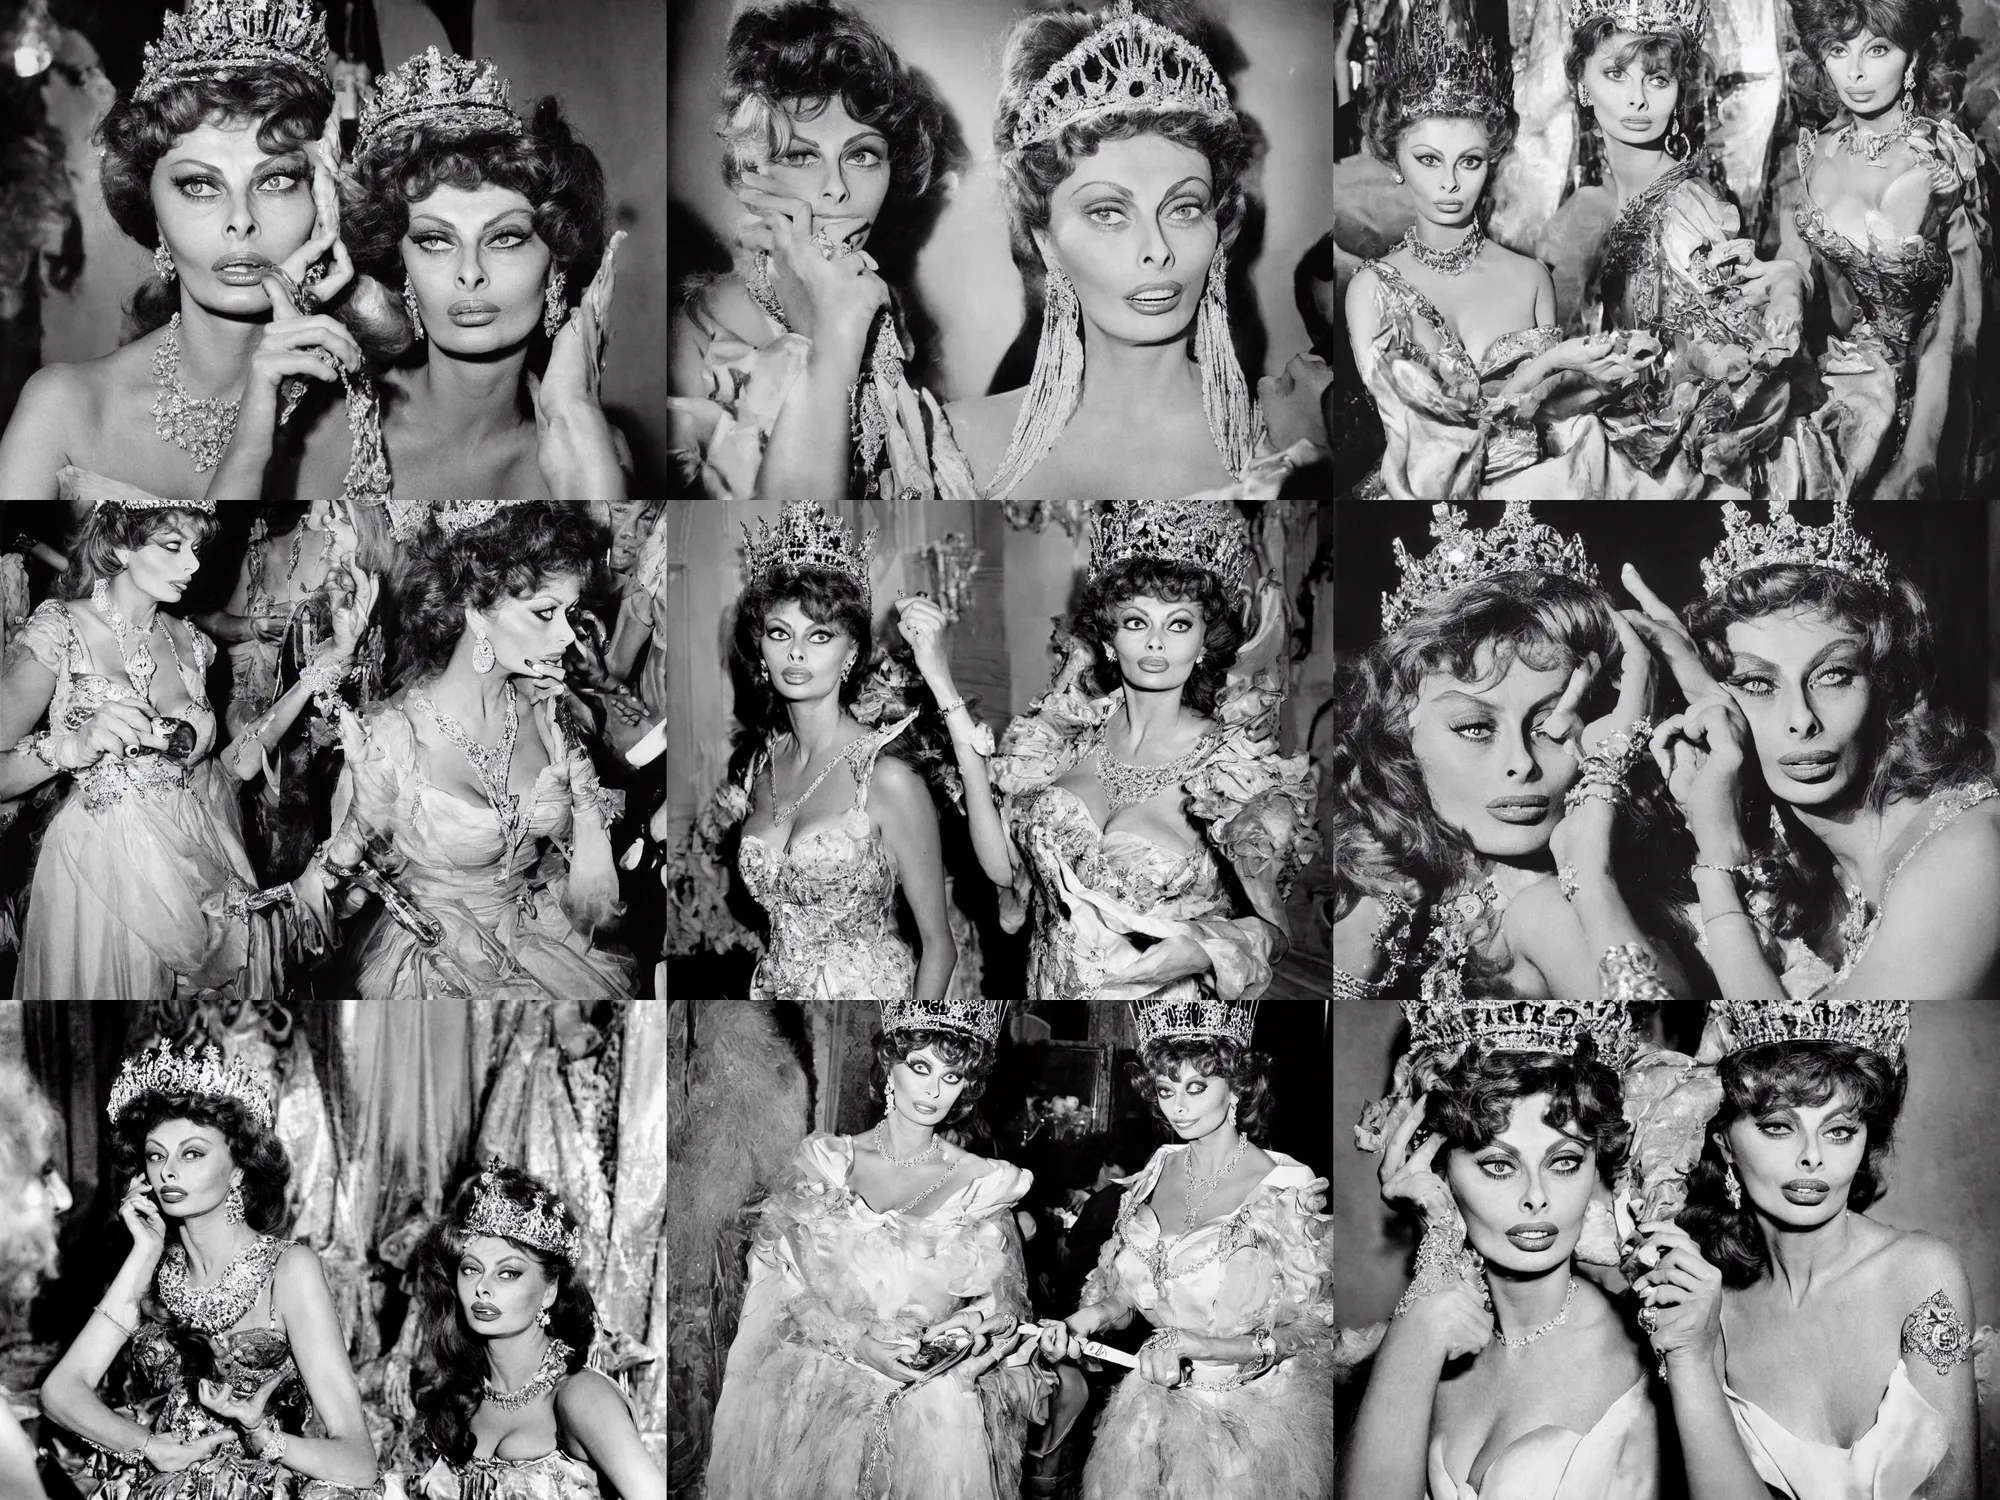 Prompt: sharing a pizza, young sophia loren, movie star, dressed up as queen margherita of savoy, beautiful ornamented tiara, stunning dress, smooth lighting, exquisit detail, masterpiece, timeless, historical behind the scenes photo by letizia battaglia